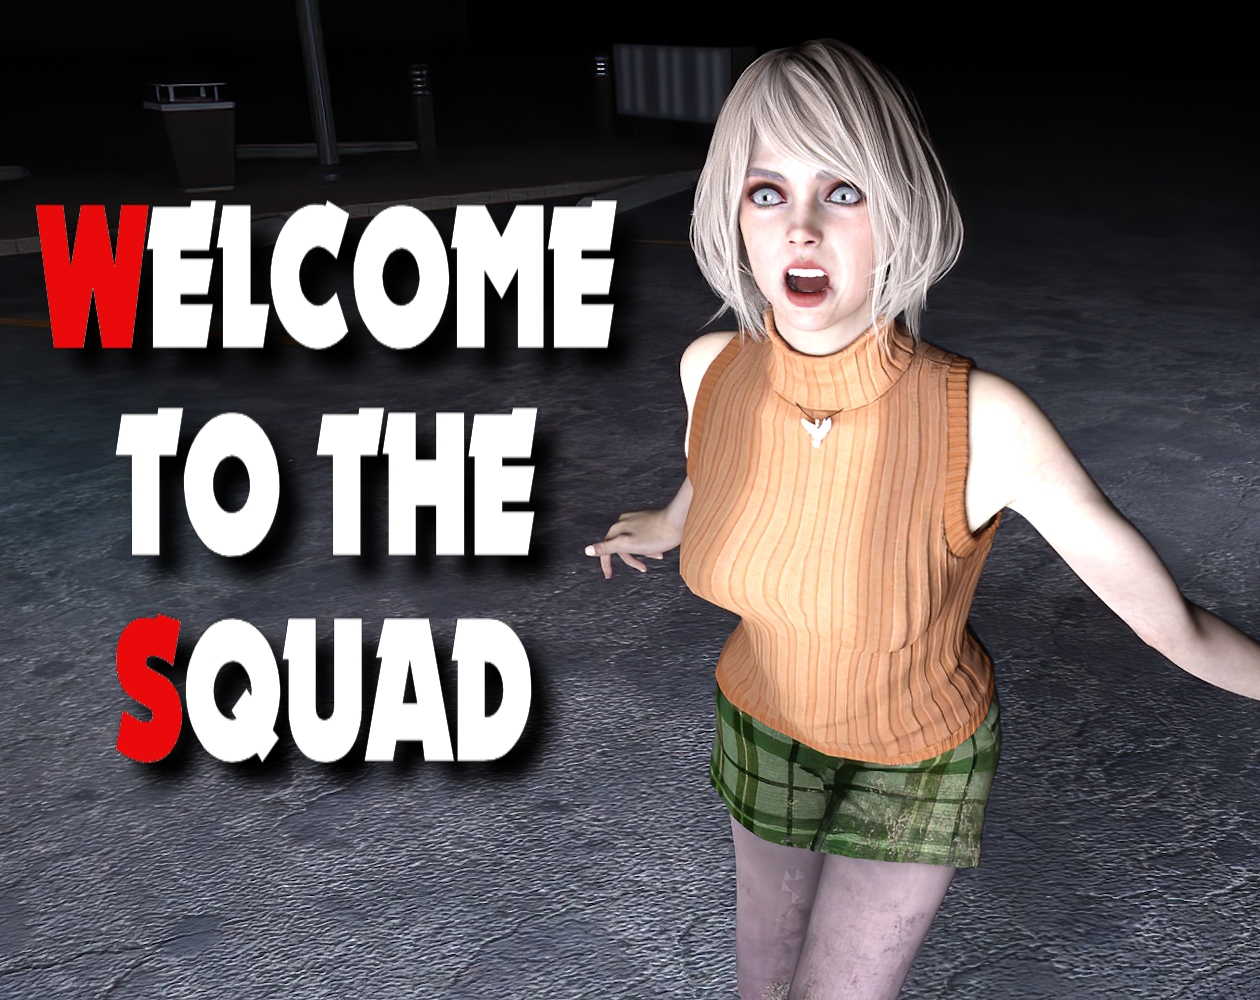 Welcome to the squad! Resident Evil Jill Valentine Ashley Graham Ada Wong Claire Redfield Rebecca Chambers Mr.x Group Nude Monster Monster Cock Police Nemesis Zombie